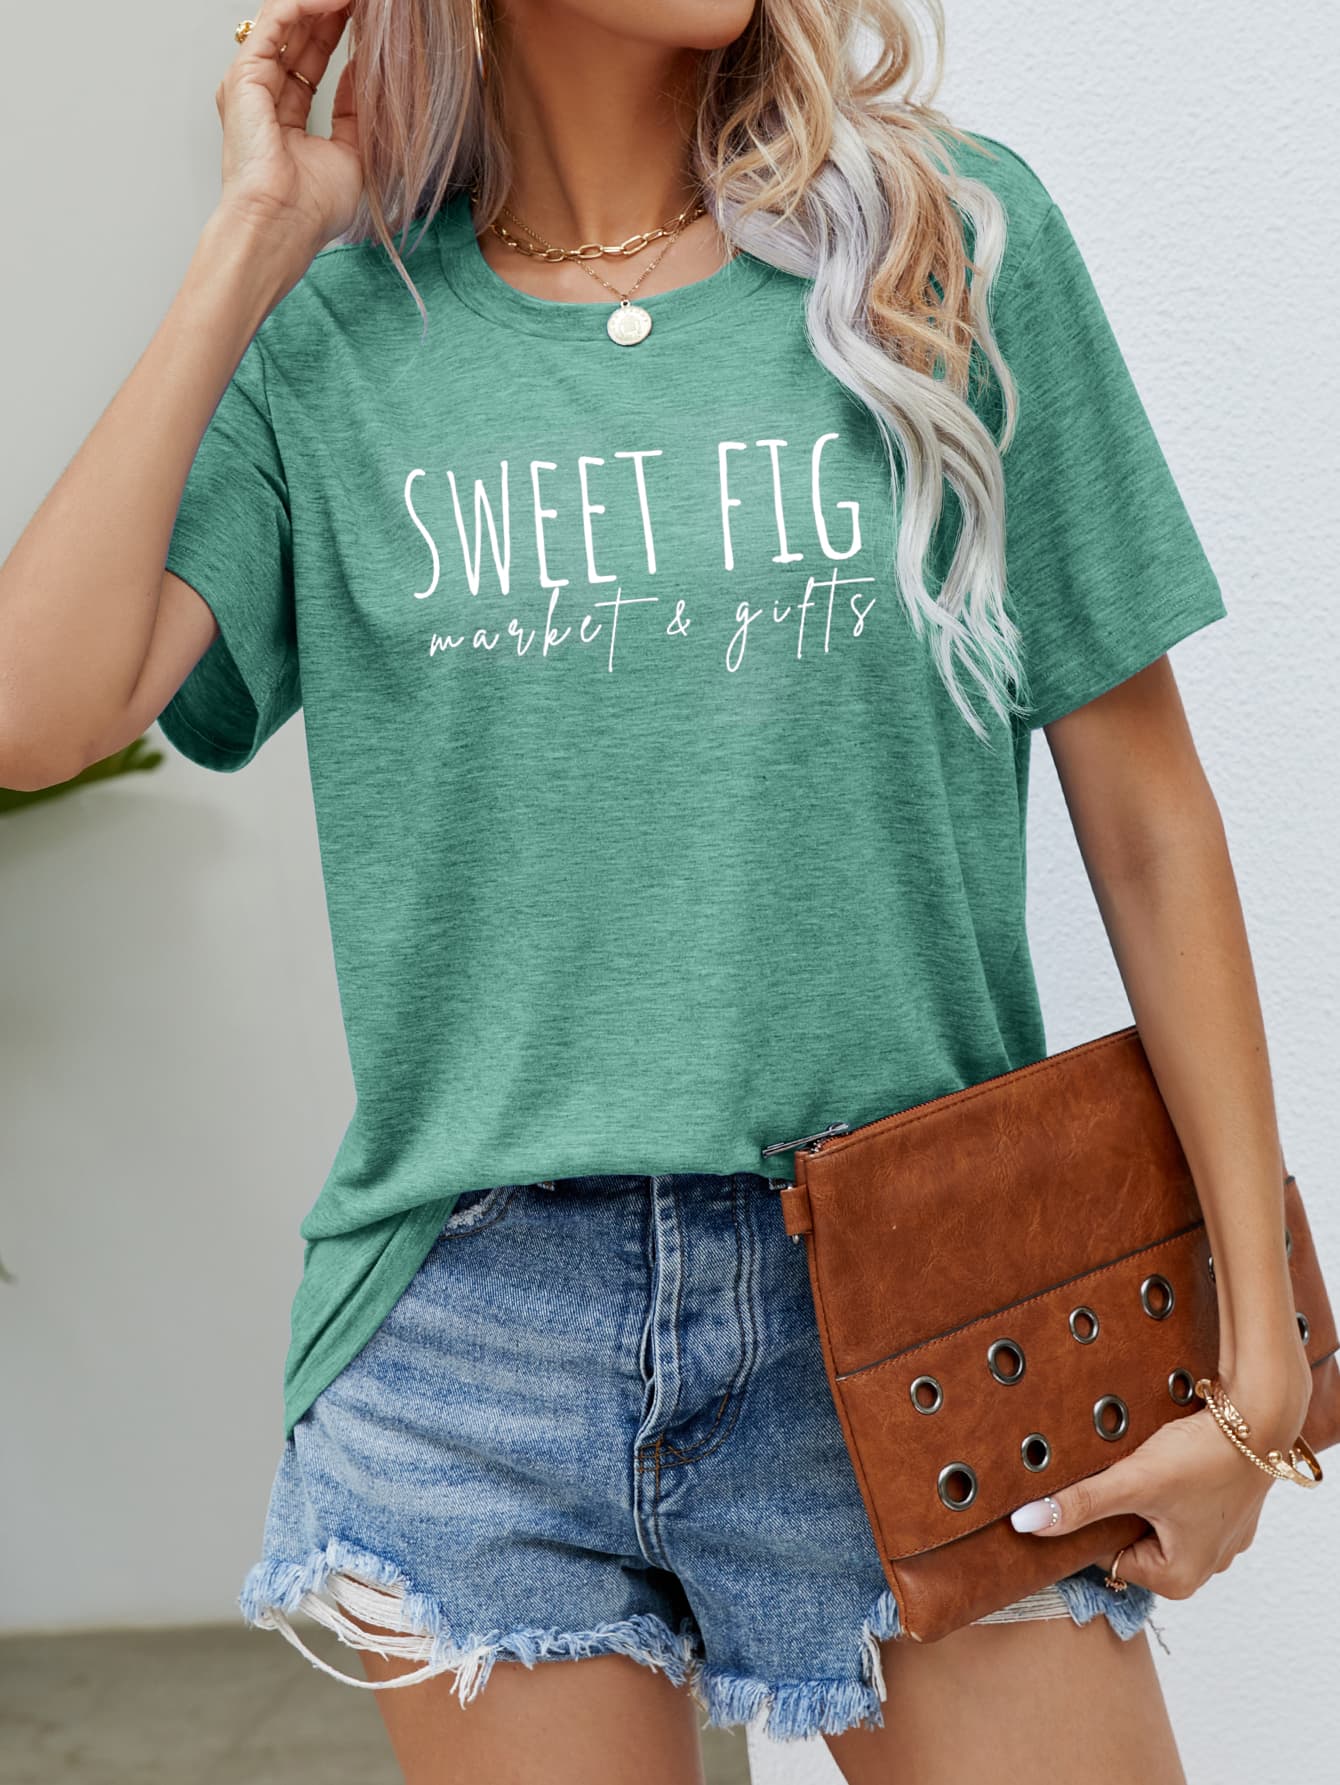 Dark Gray SWEET FIG MARKET & GIFTS Graphic Tee Tops